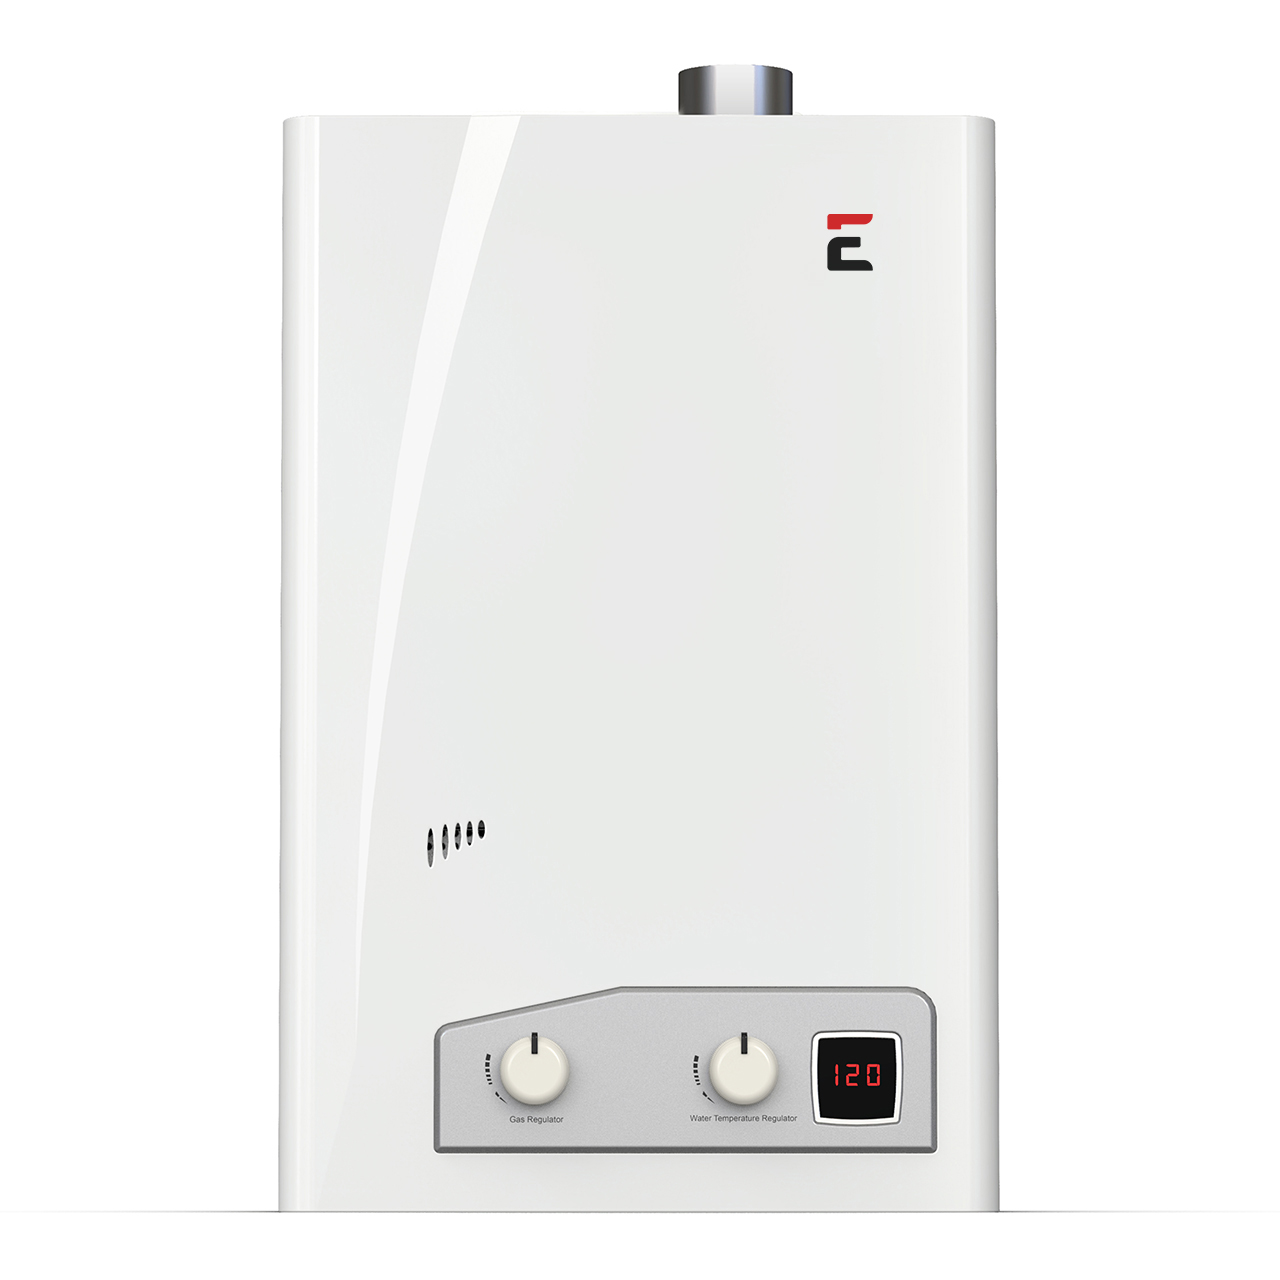 Eccotemp FVI12 Indoor 4.0 GPM Natural Gas Tankless Water Heater